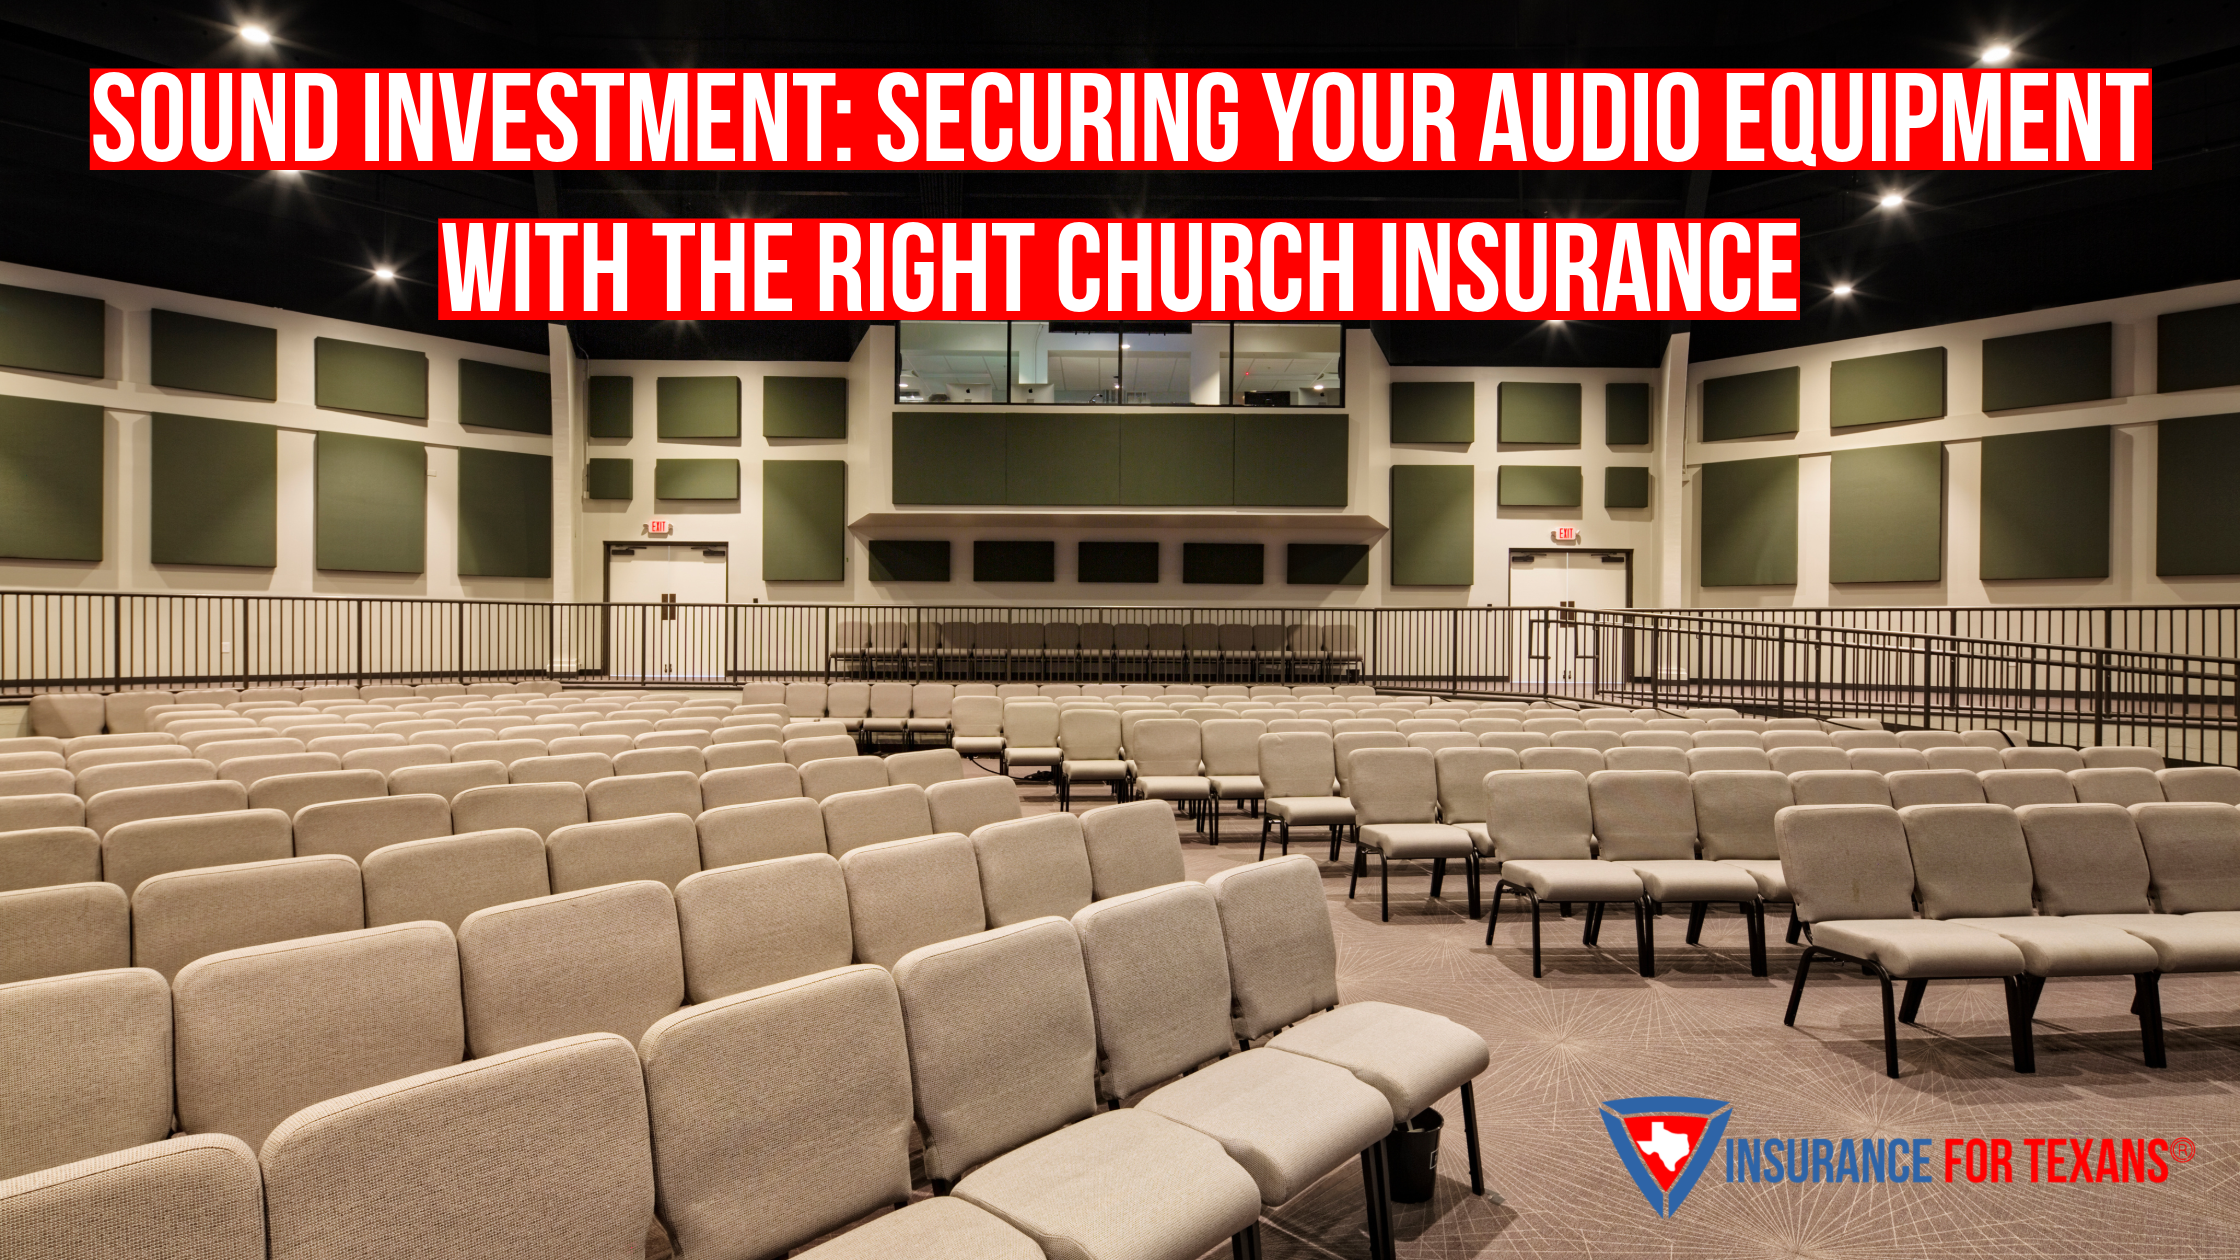 Sound Investment: Securing Your Audio Equipment With The Right Church Insurance